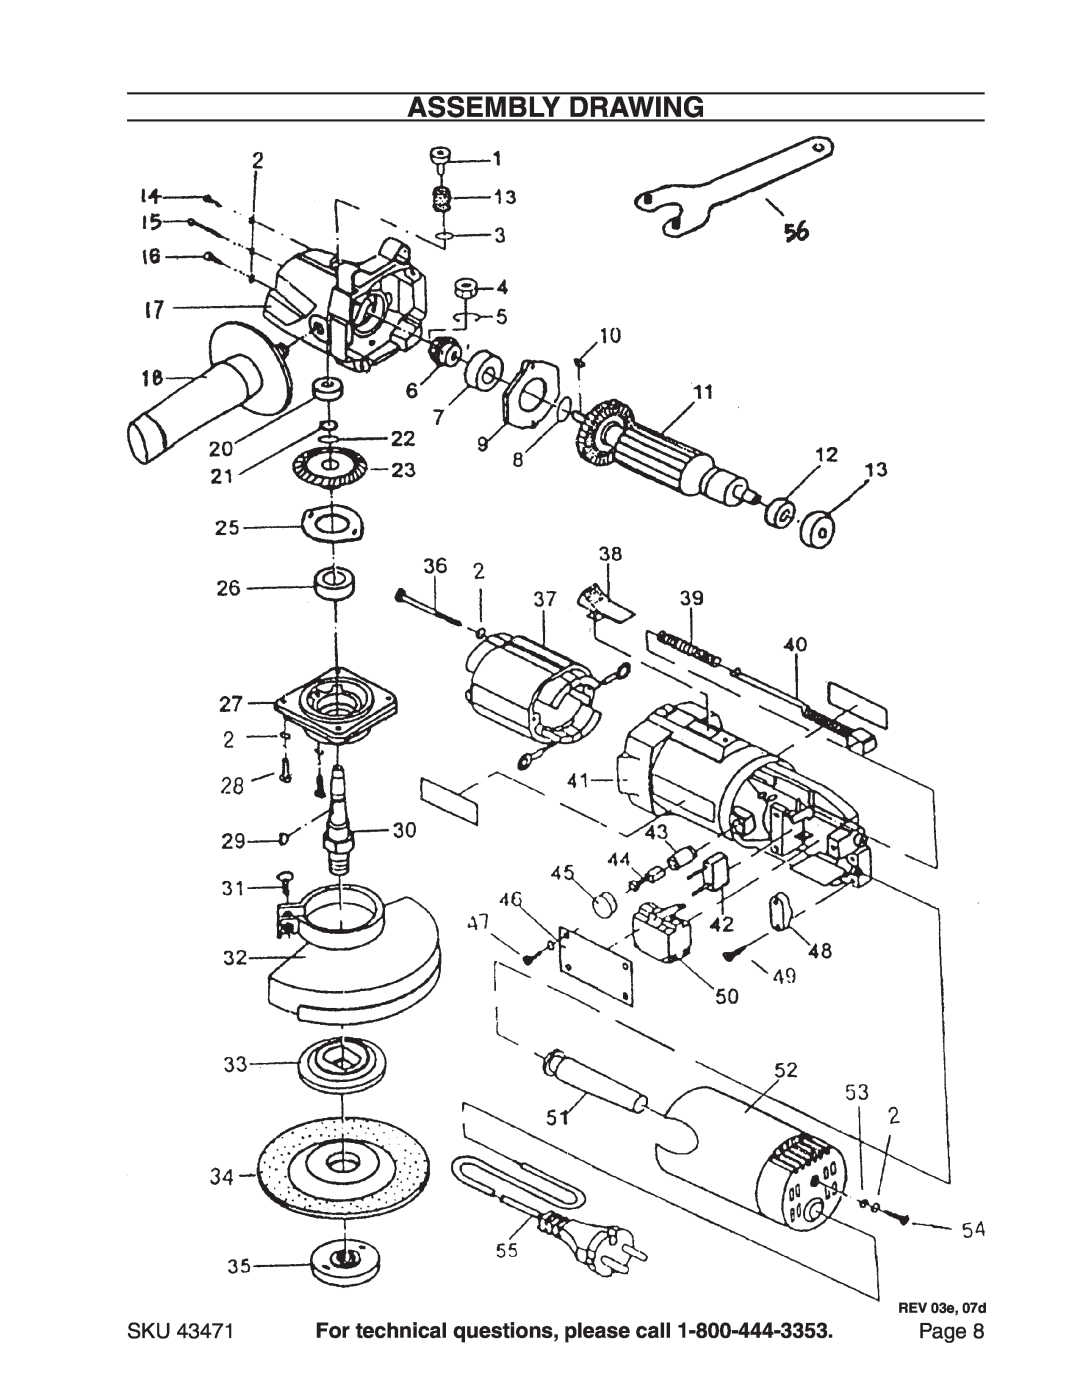 Harbor Freight Tools 43471 manual Assembly Drawing, For technical questions, please call, REV 03e, 07d 